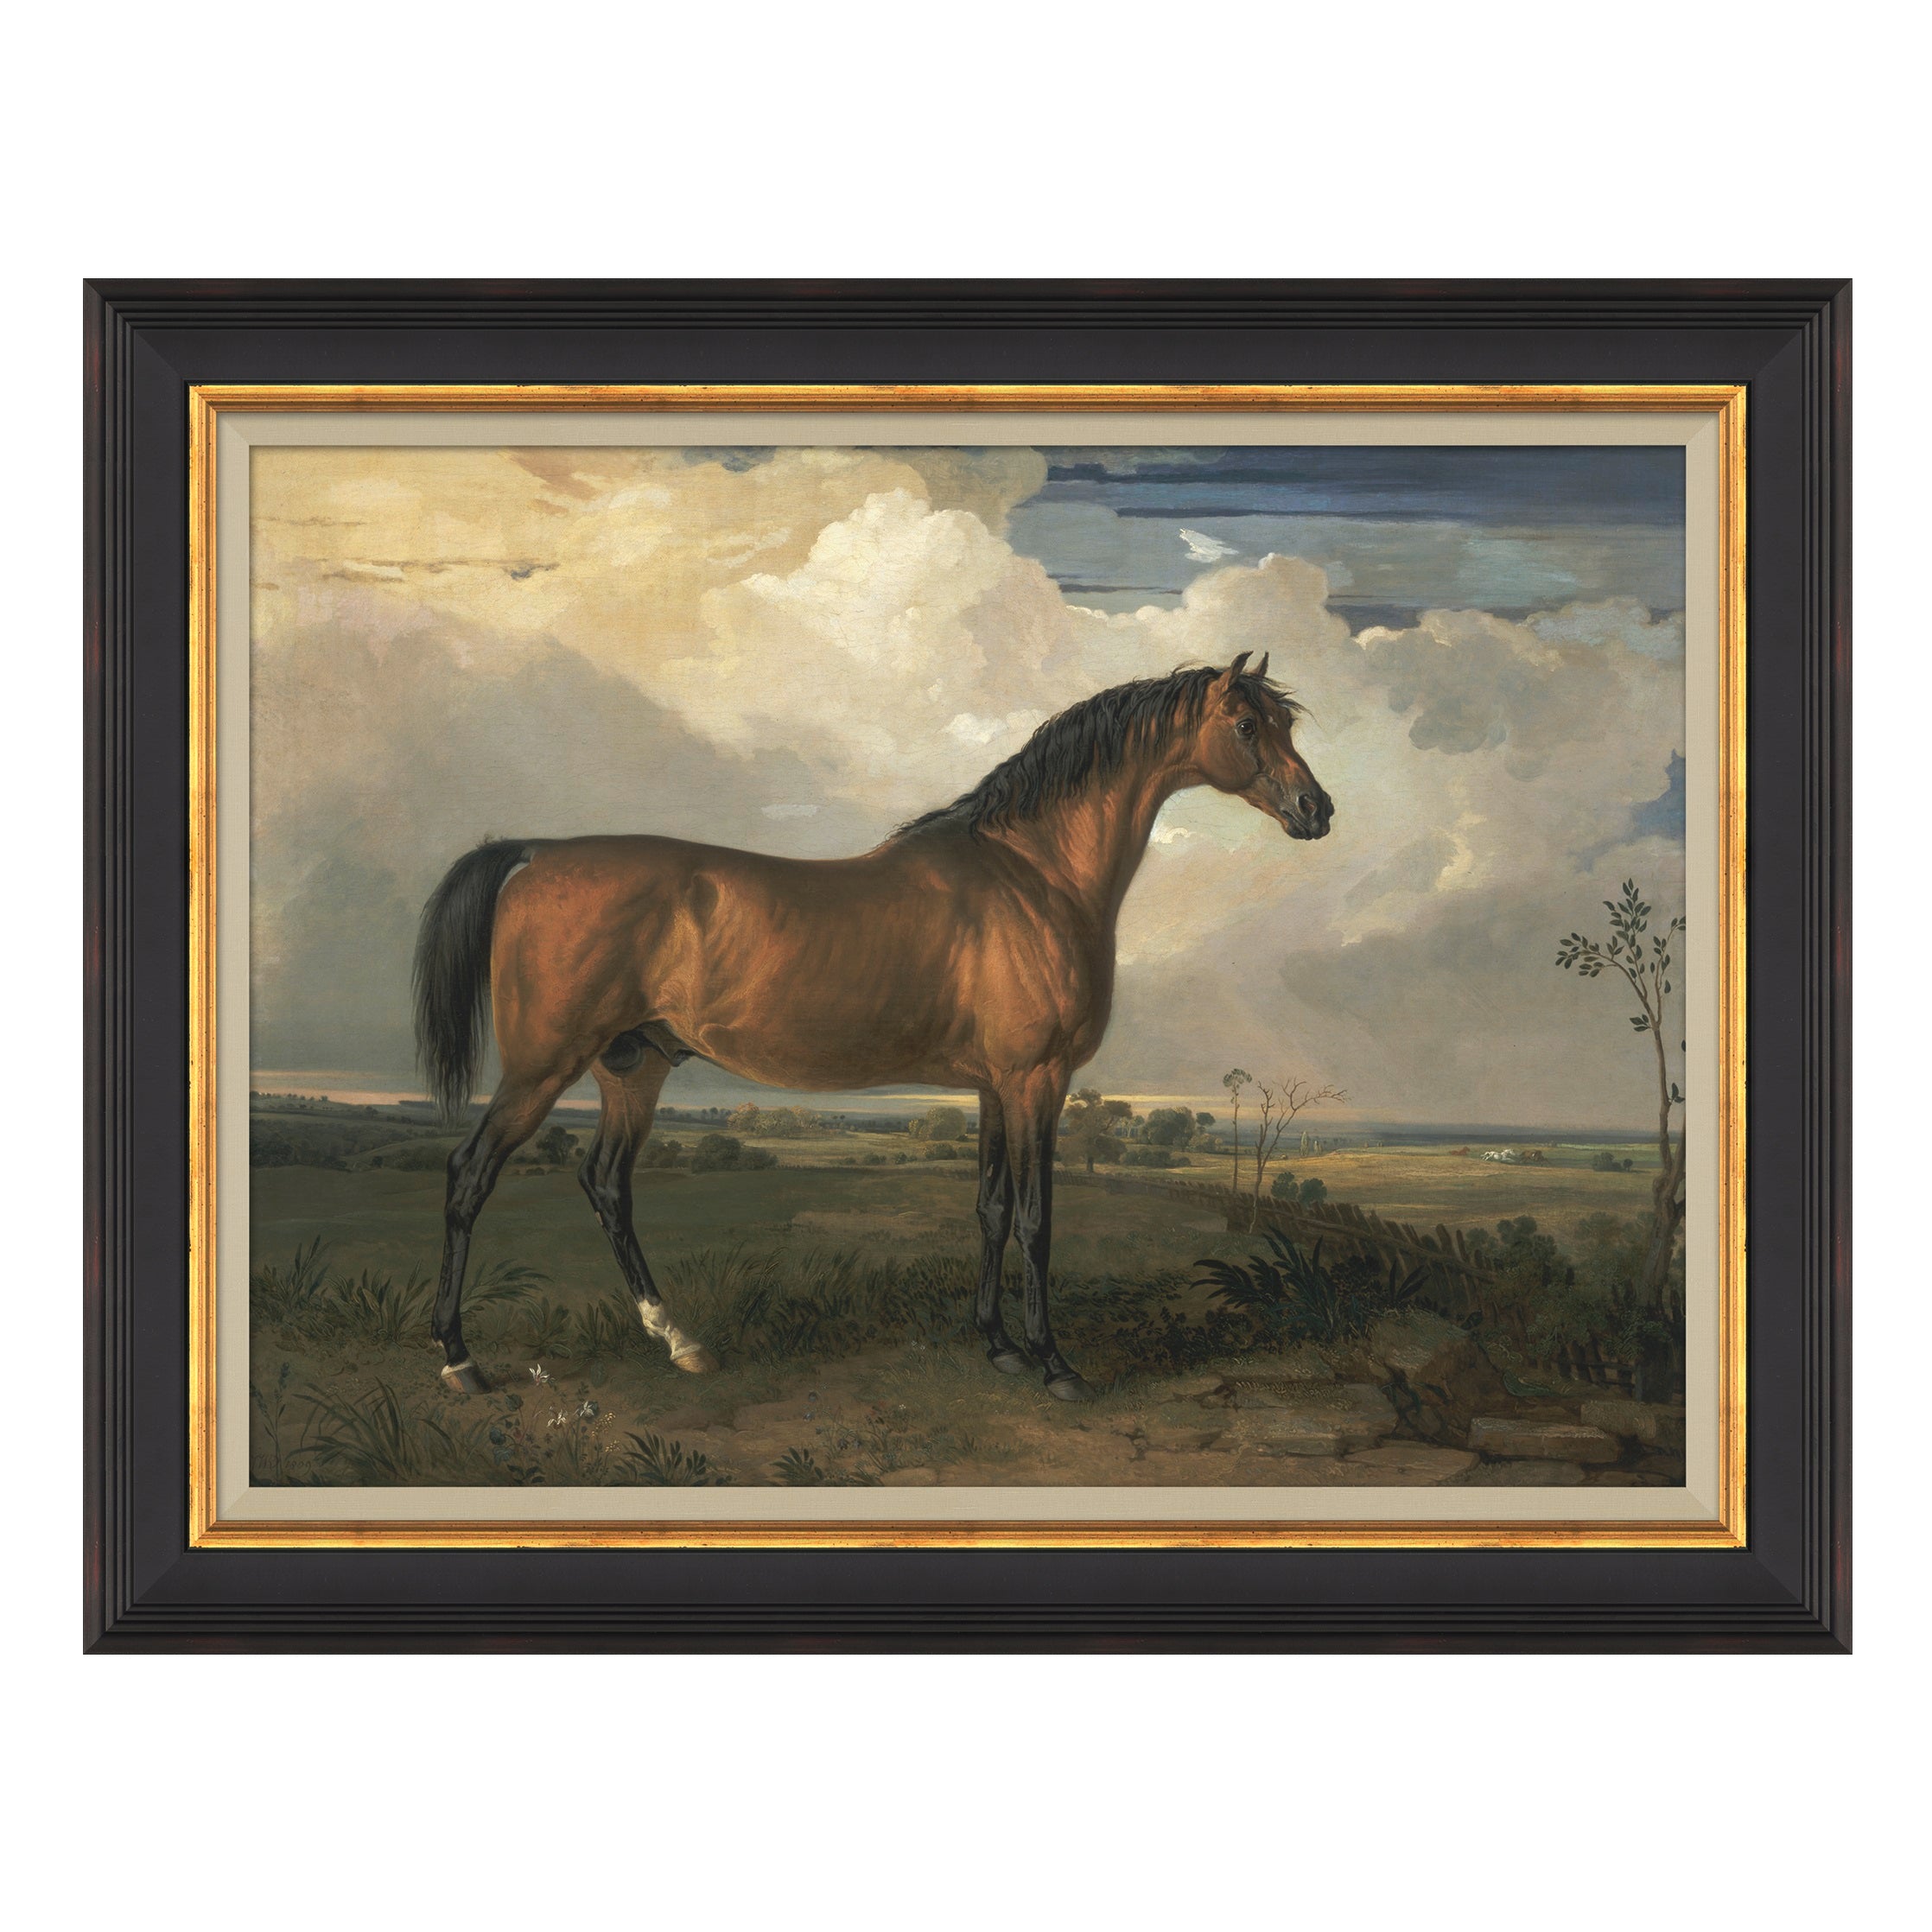 Framed wall art called equestrian study shows a horse in a field with clouds in background $348.00